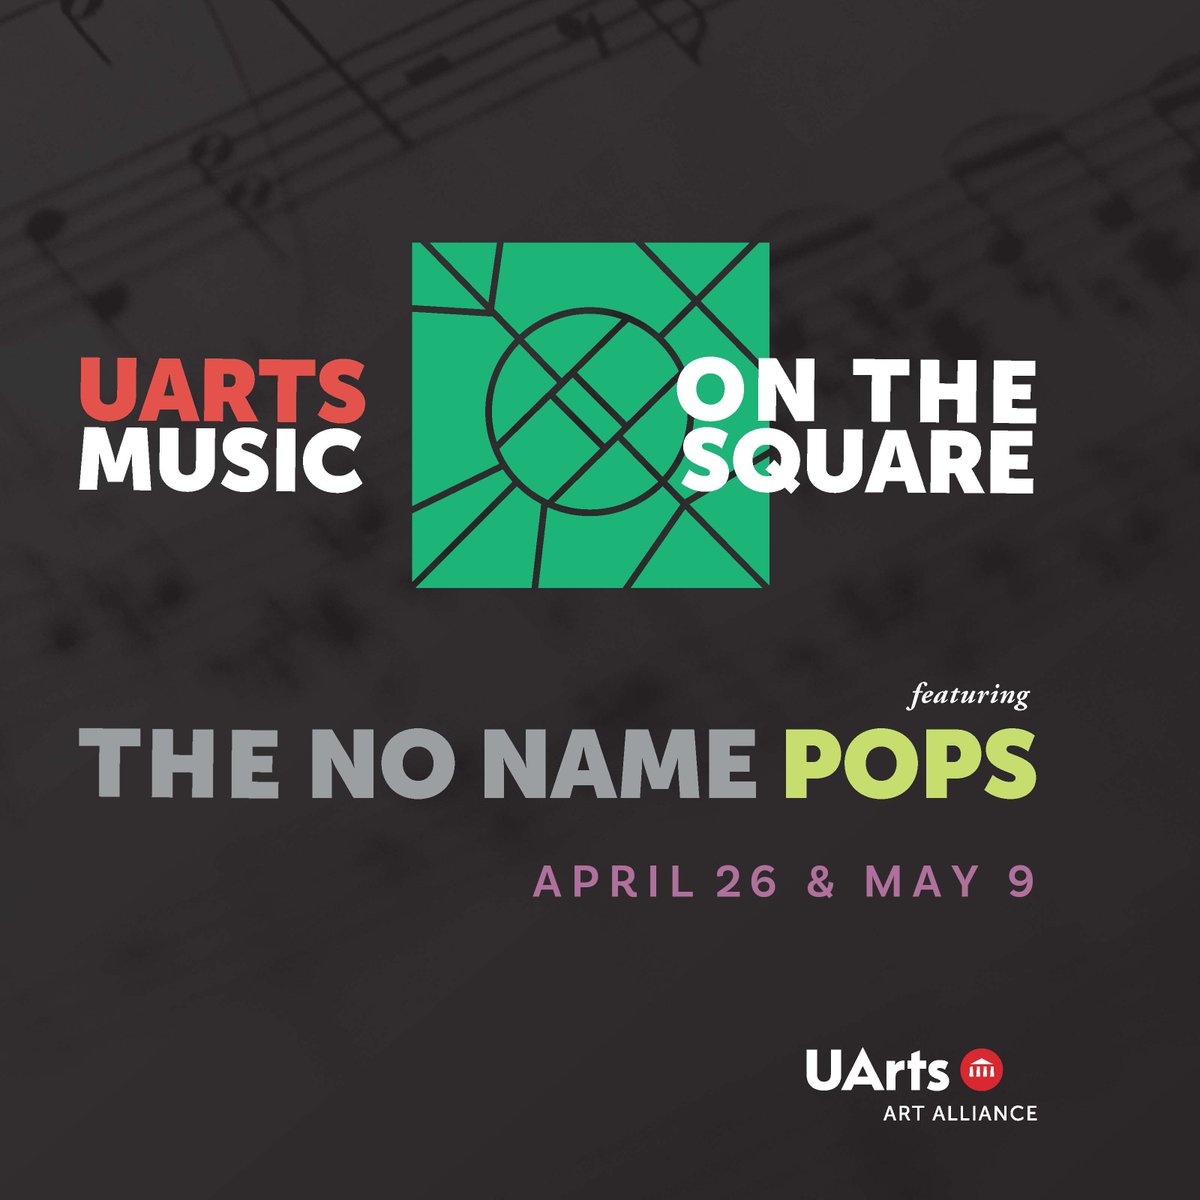 🎶 Exciting news! Join us for MUSIC ON THE SQUARE! 🎵 🎤 Paula Holloway & The No Name Pops: Apr 26, 6 p.m. 🎤 Eddie Bruce & The No Name Pops: May 9, 6 p.m. 🍷 Receptions to follow both shows! Don't miss this Spring Send Off! Visit uarts.edu/musiconthesqua… for details.